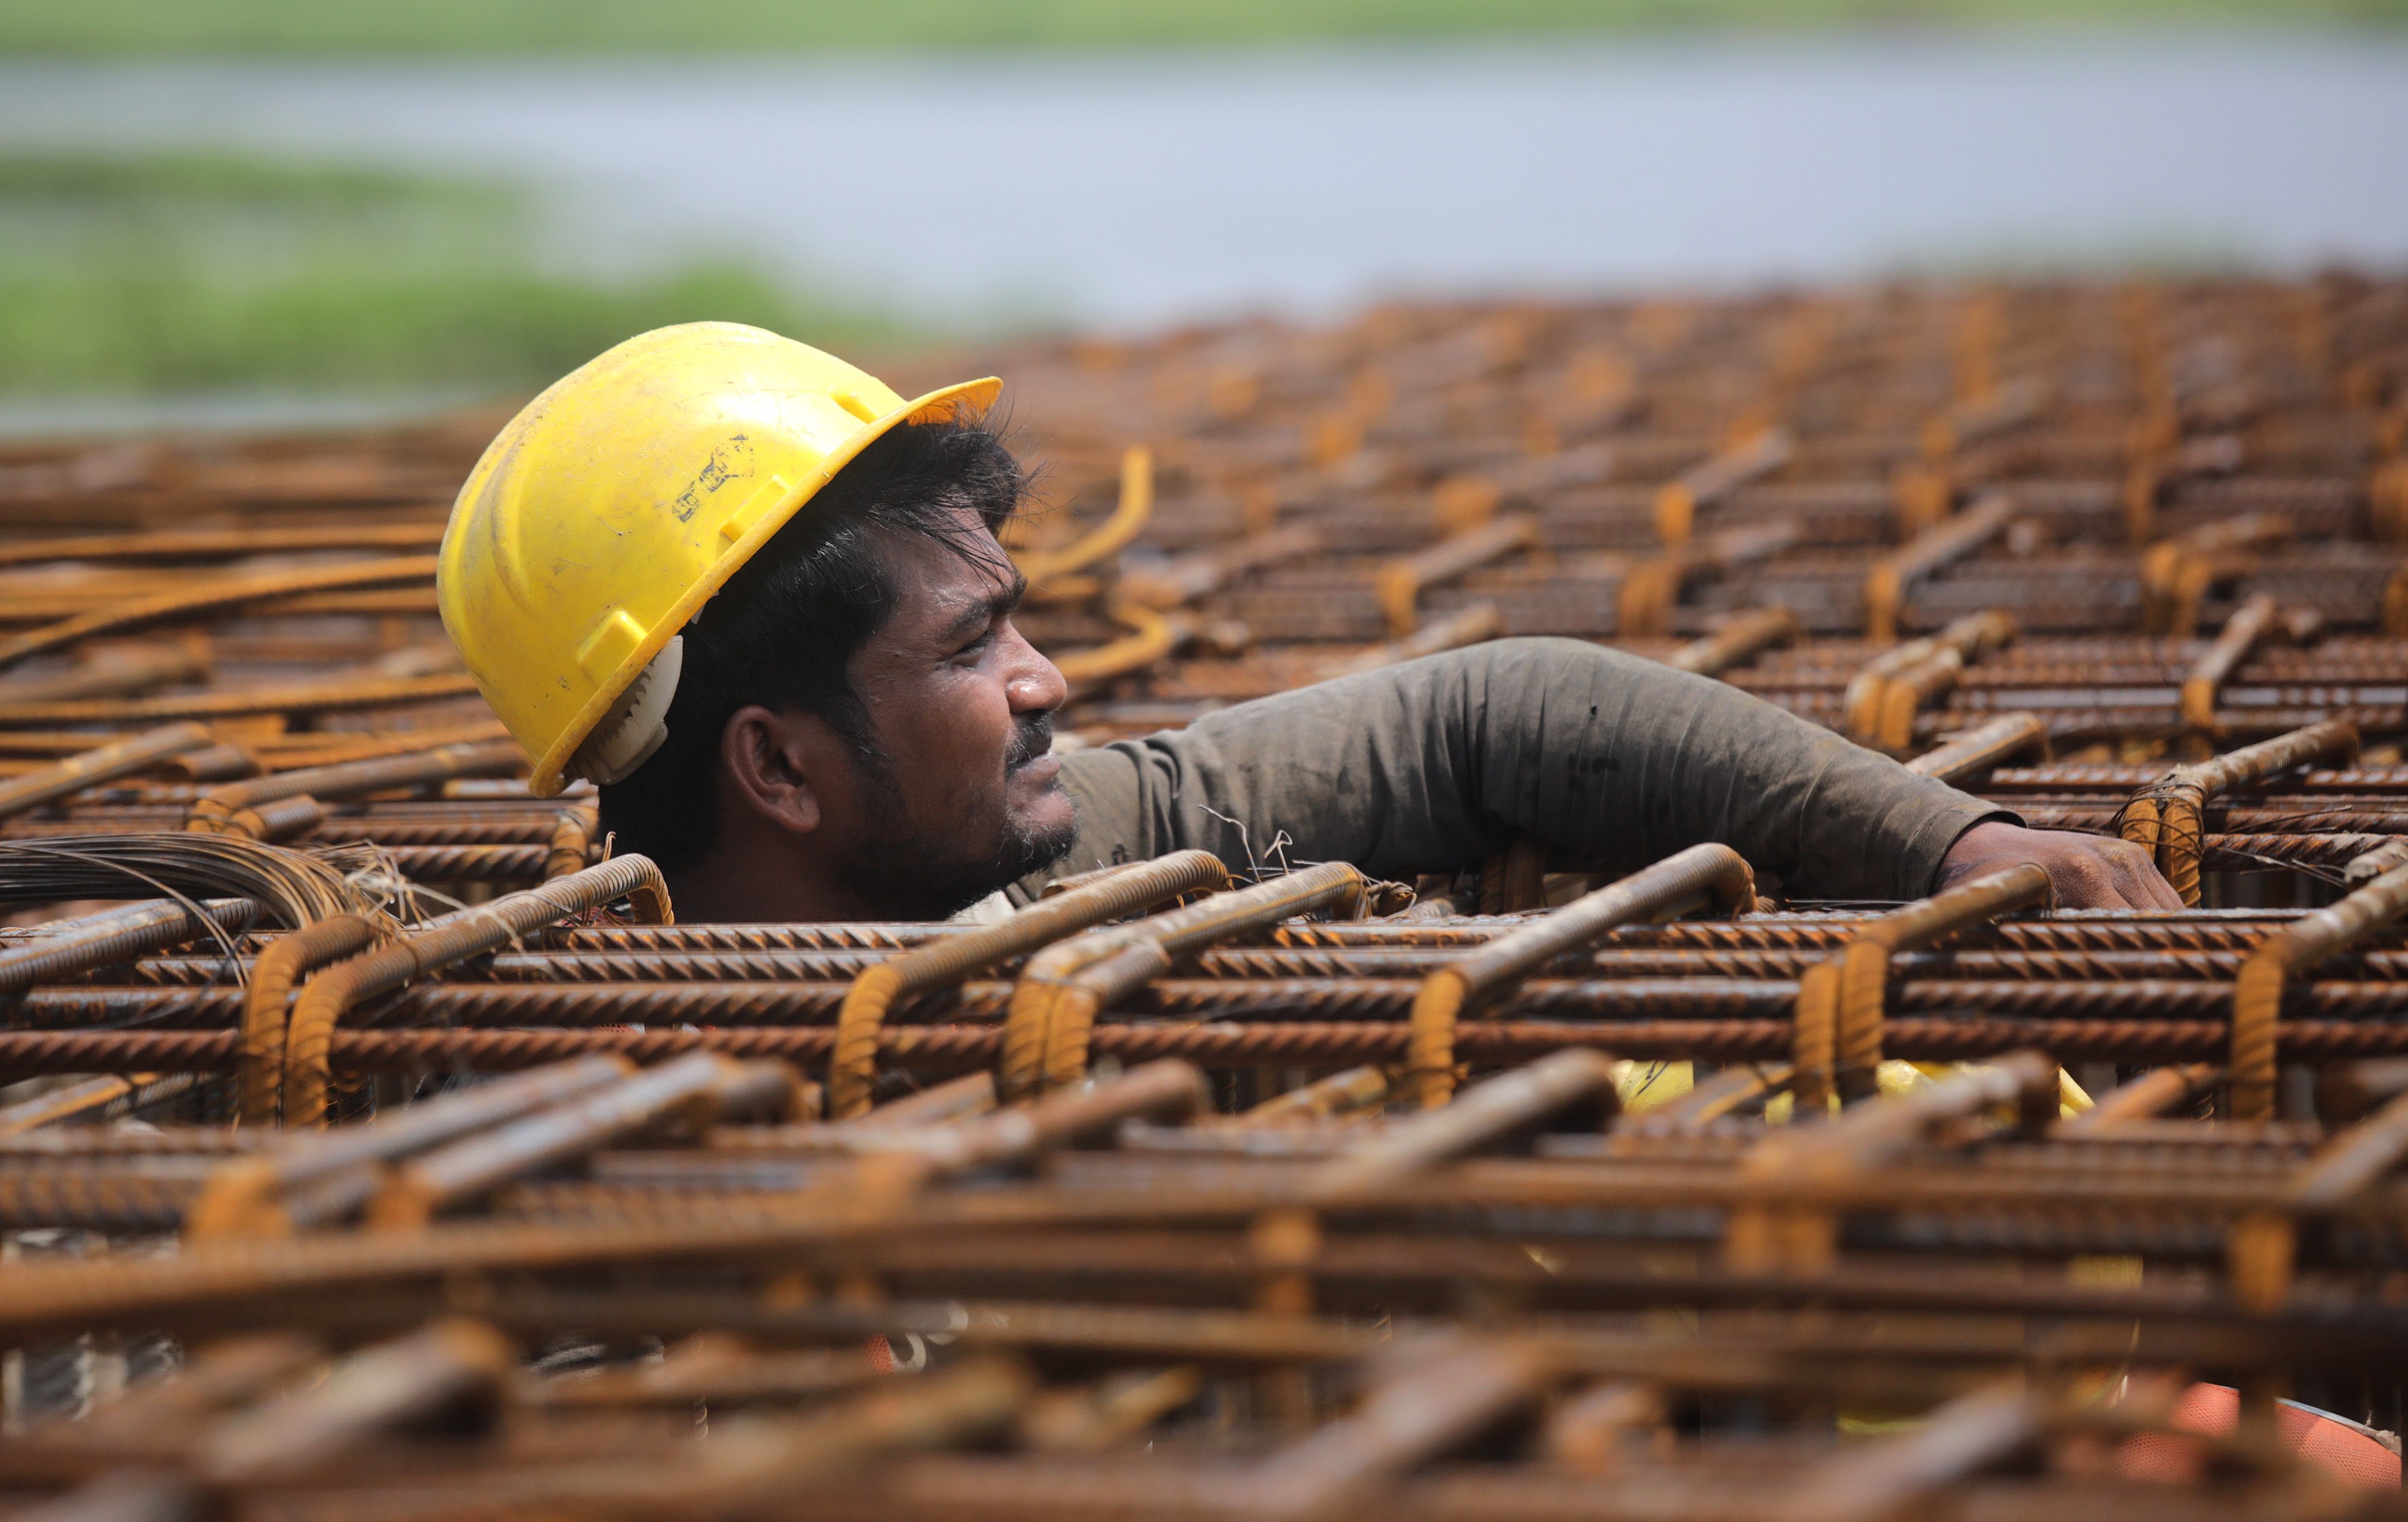 A labourer works on a construction site near Kolkata, India, on May 2. Some two-thirds of all workers in the Asia-Pacific region are employed informally, often on low wages, in hazardous conditions and without a contract. Photo: EPA-EFE